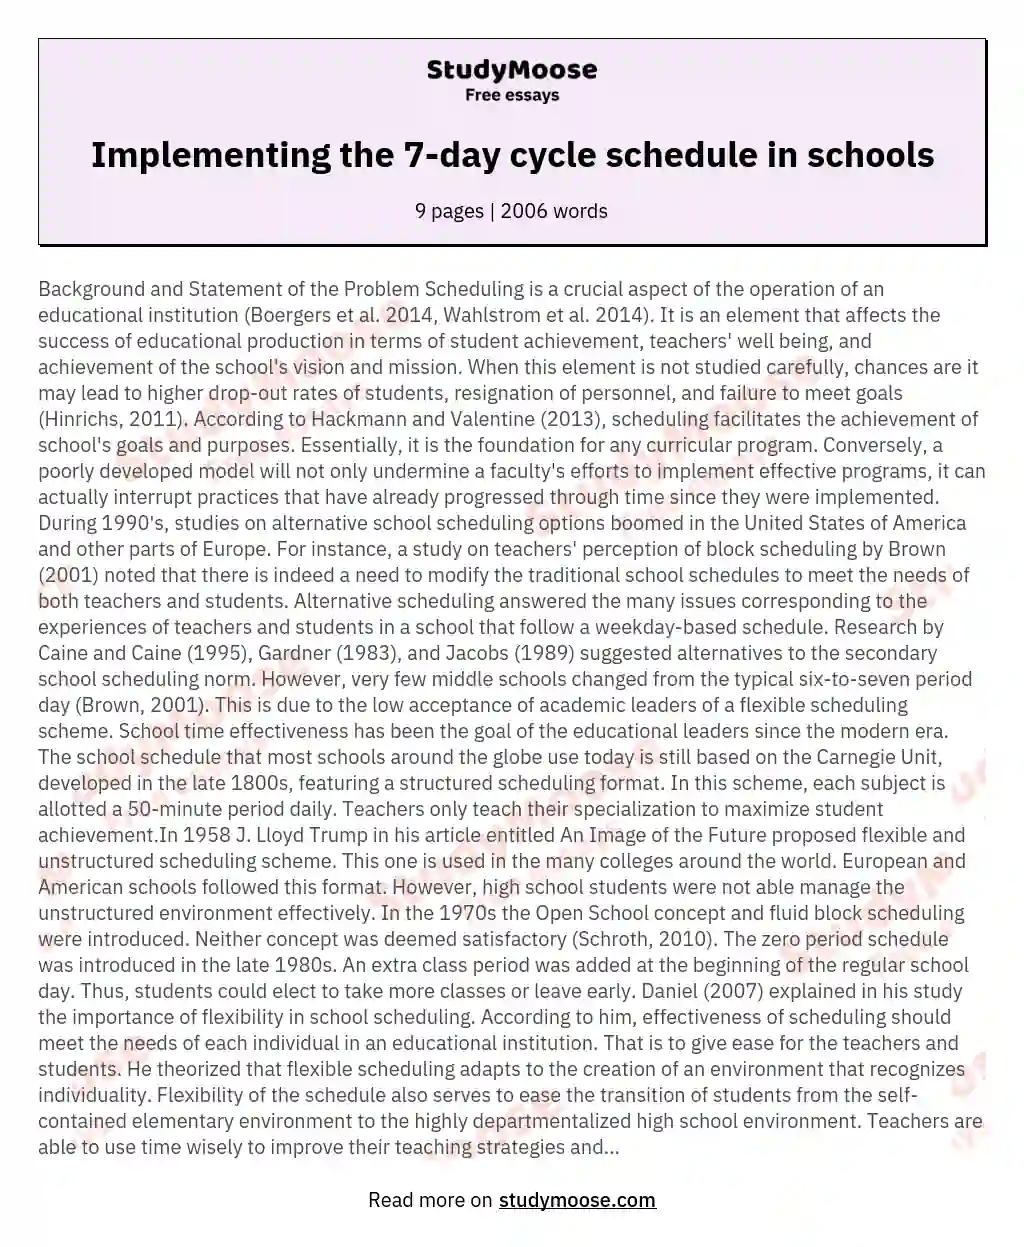 Implementing the 7-day cycle schedule in schools essay